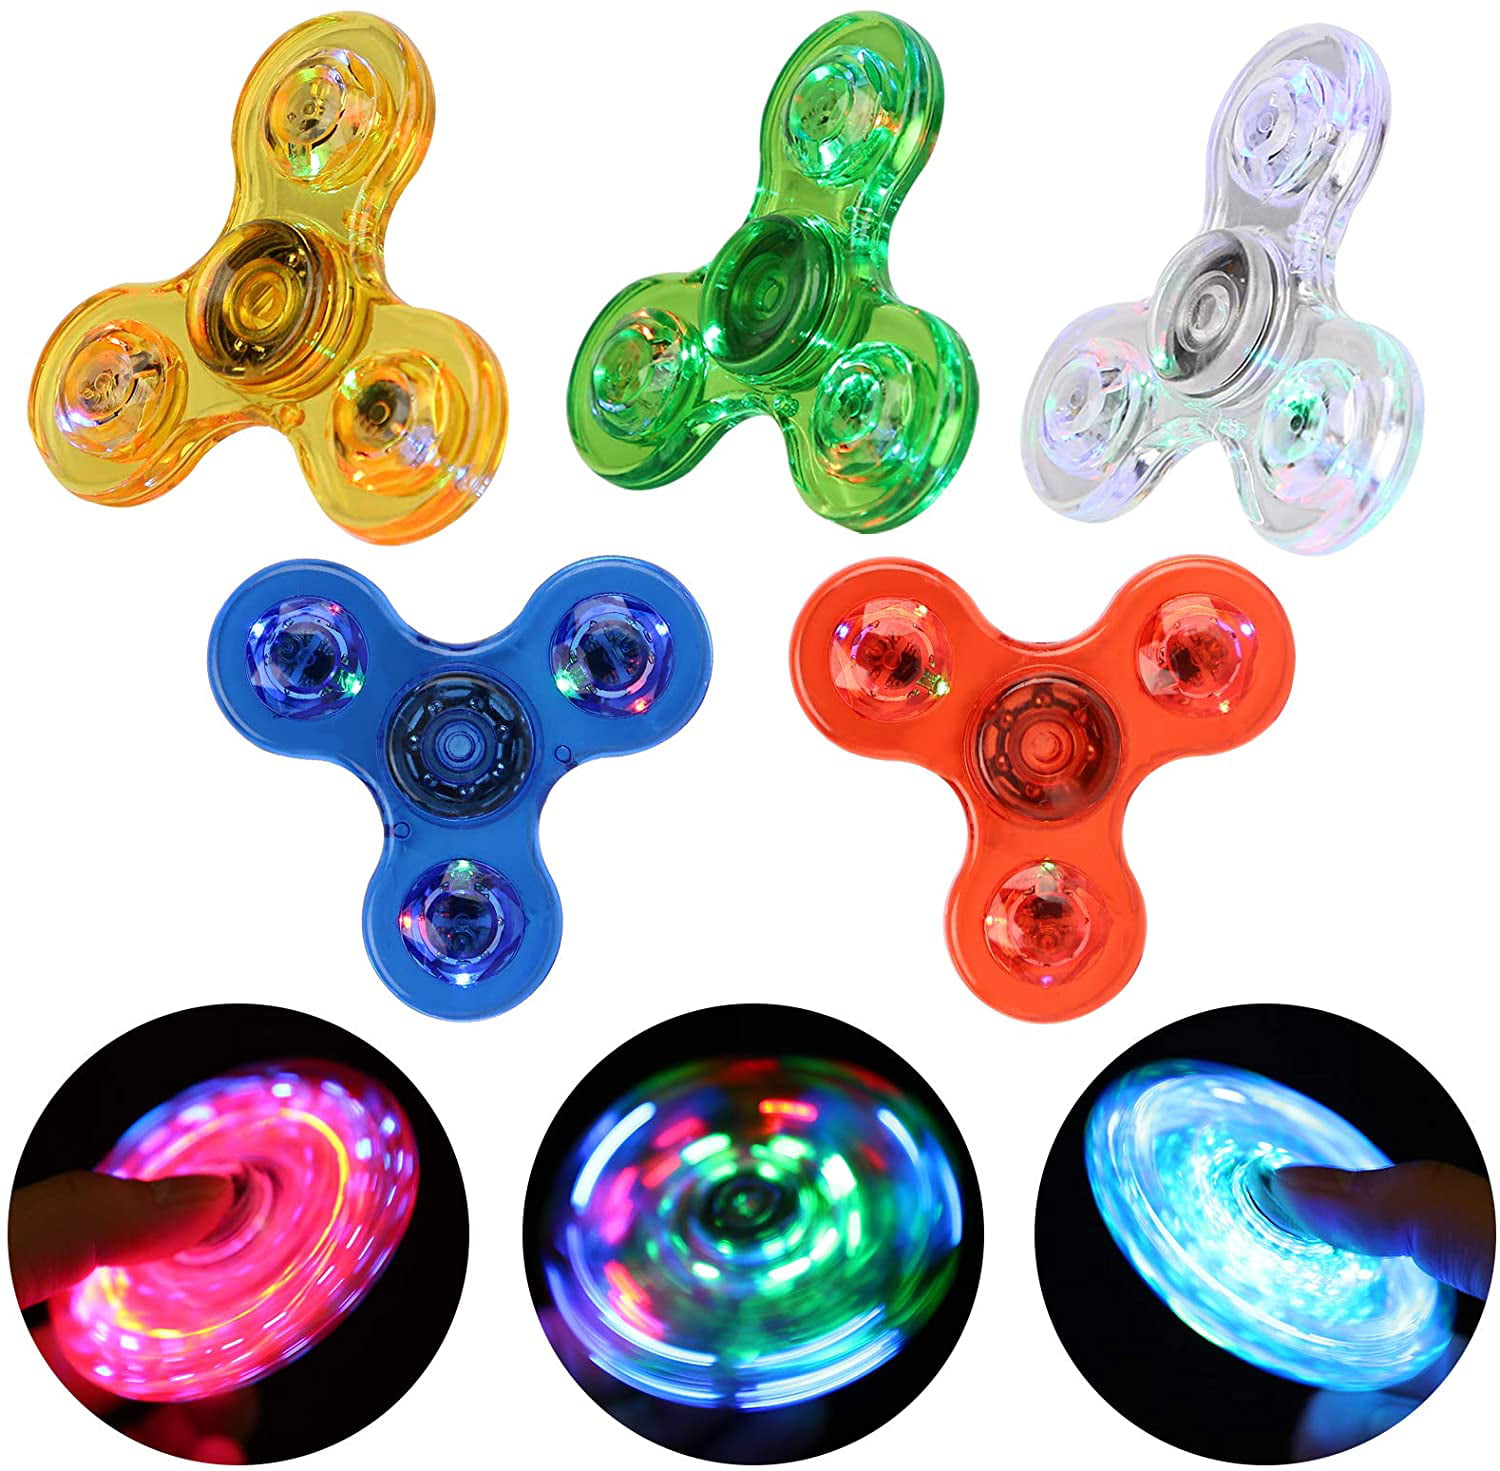 Fidget Spinner for Adults and Kids Stress Anxiety ADHD Relief Fidget Spinners 